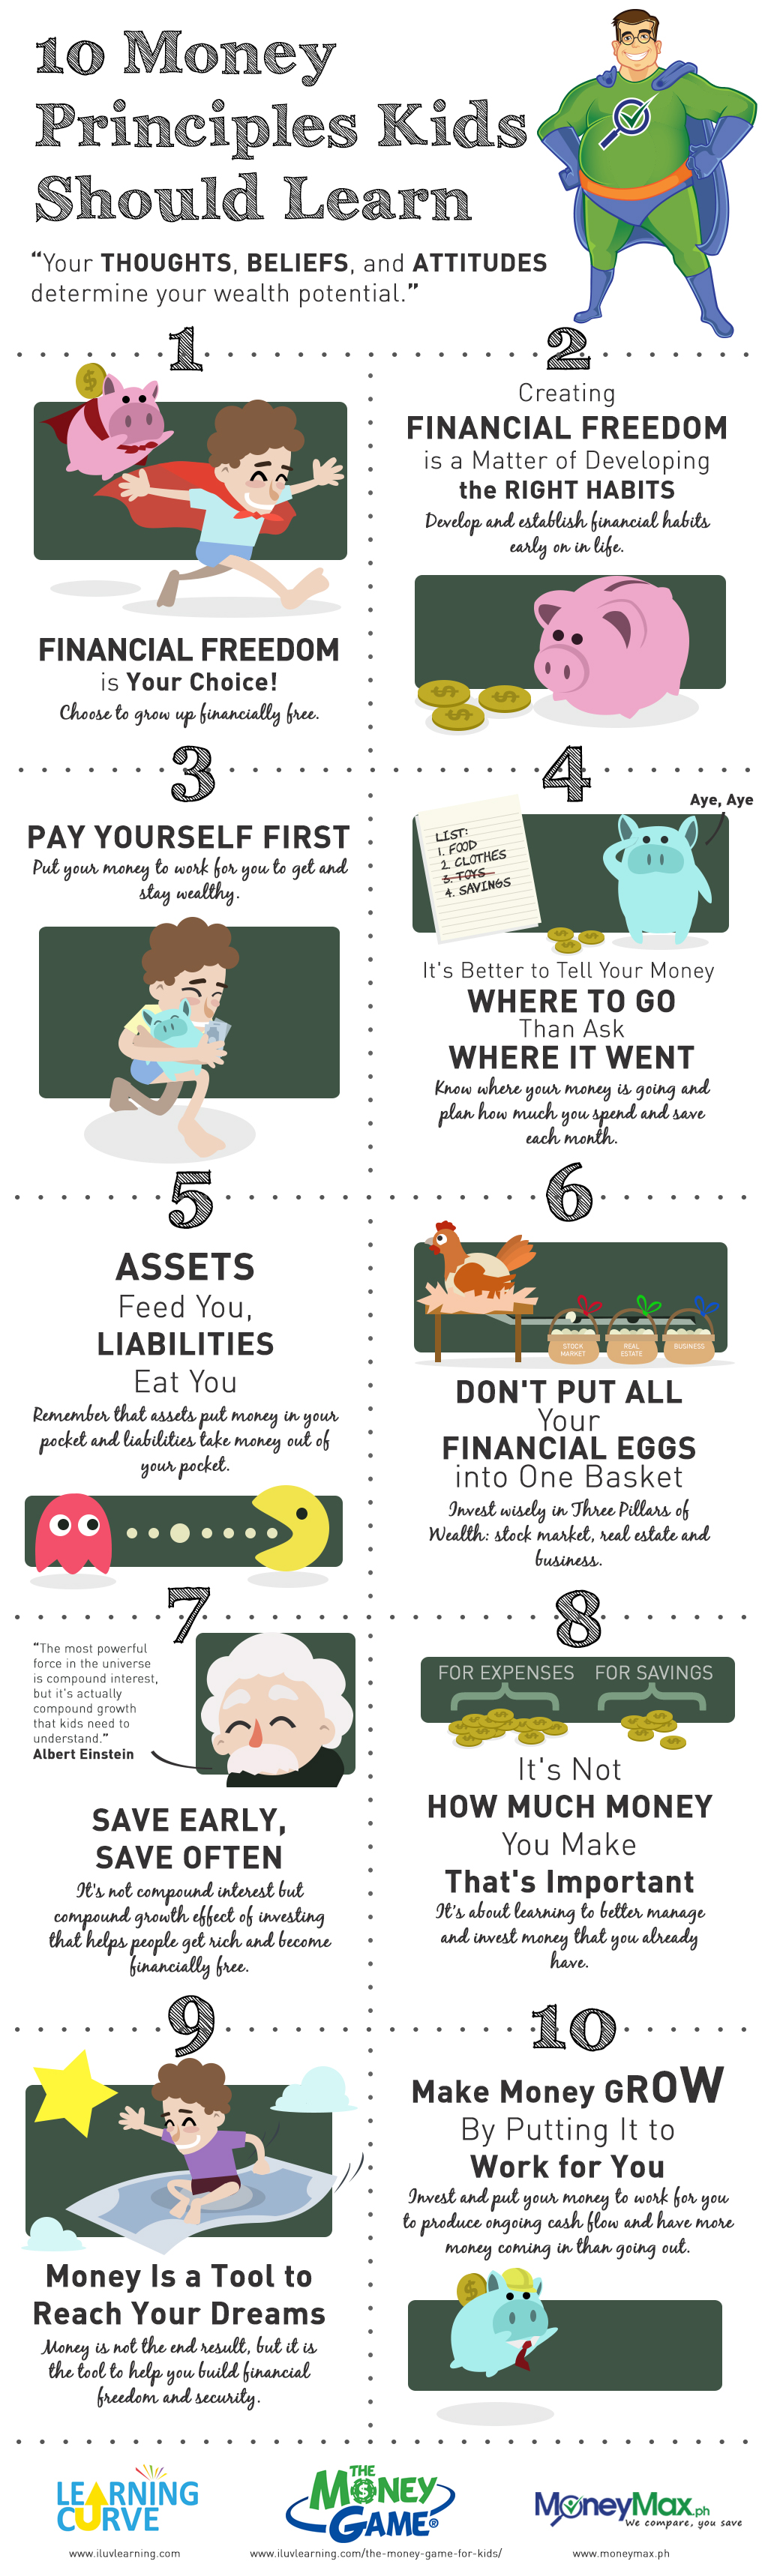 The 10 Money Principles Kids Should Learn Infographic